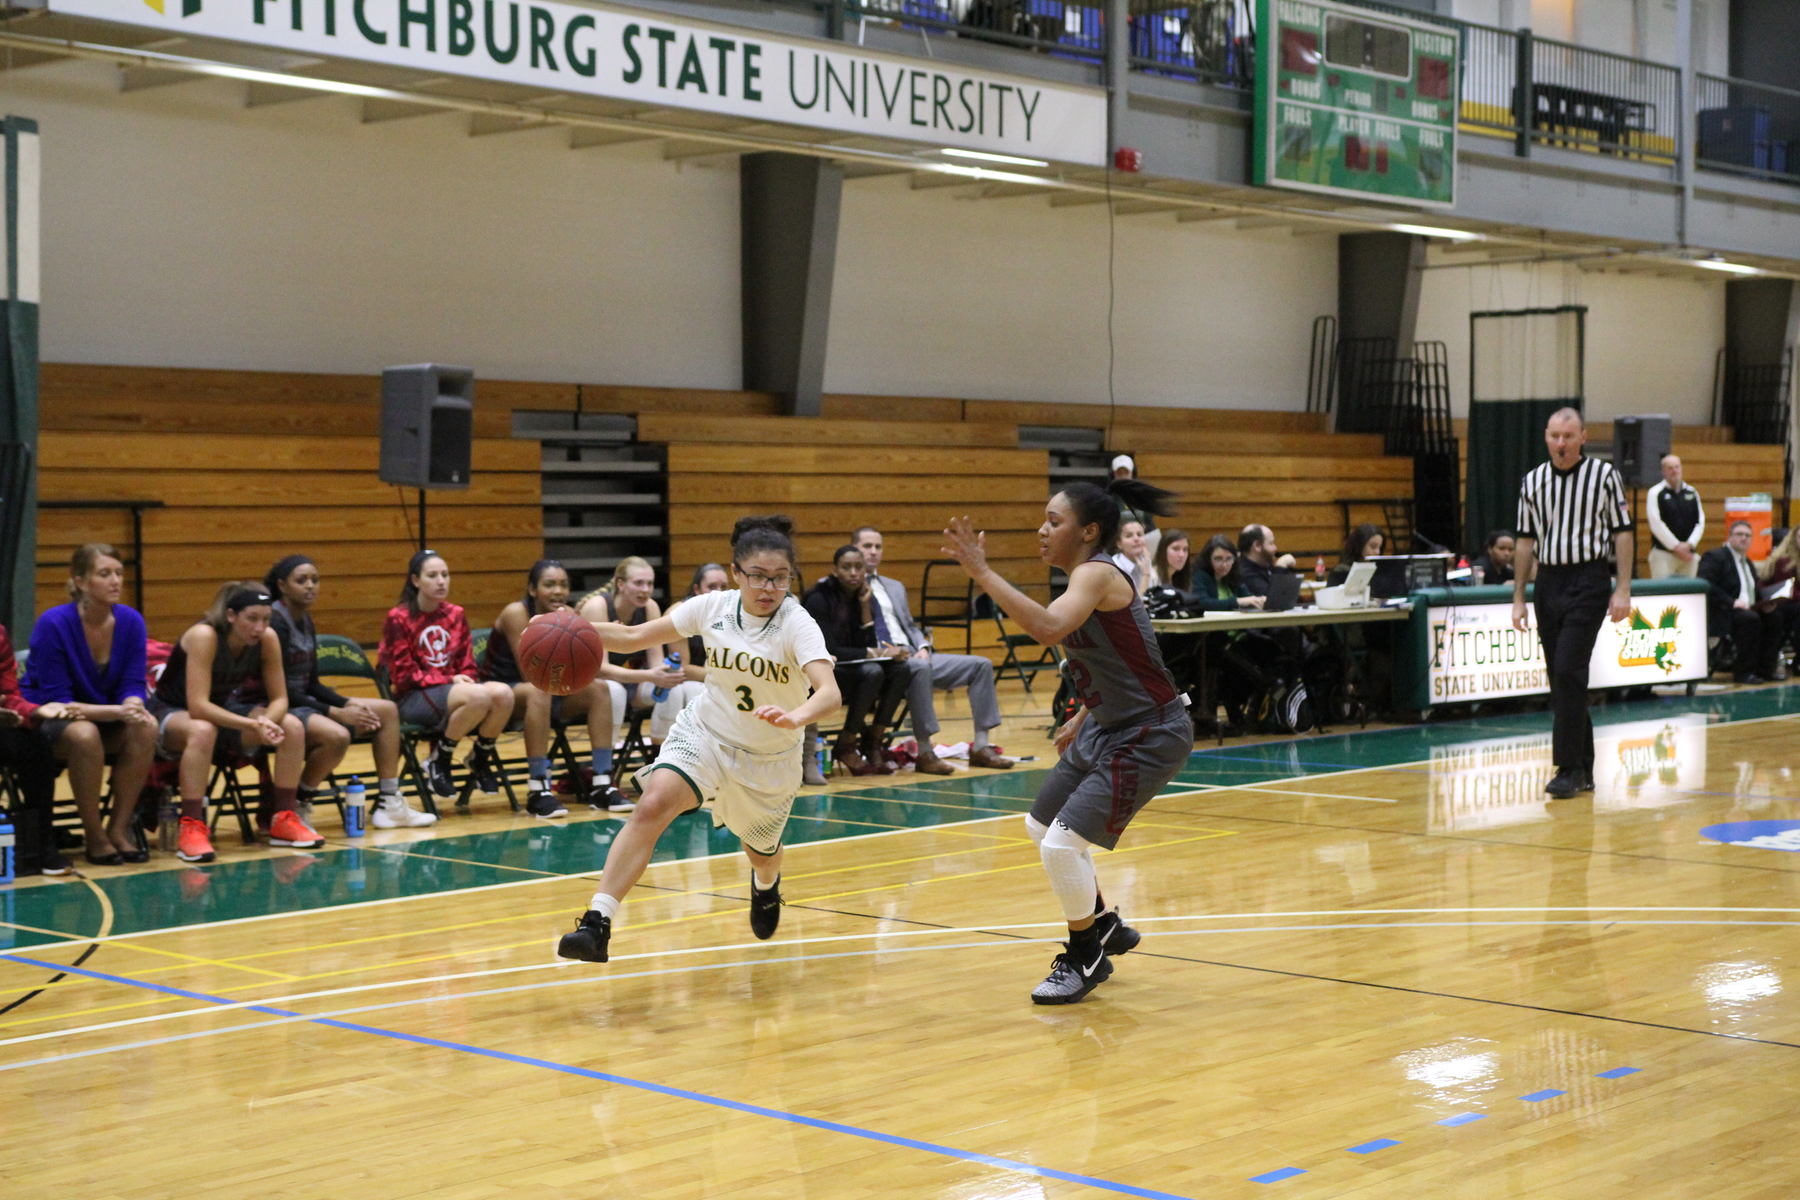 Fitchburg State Withstands Dean College, 94-89 (2OT)